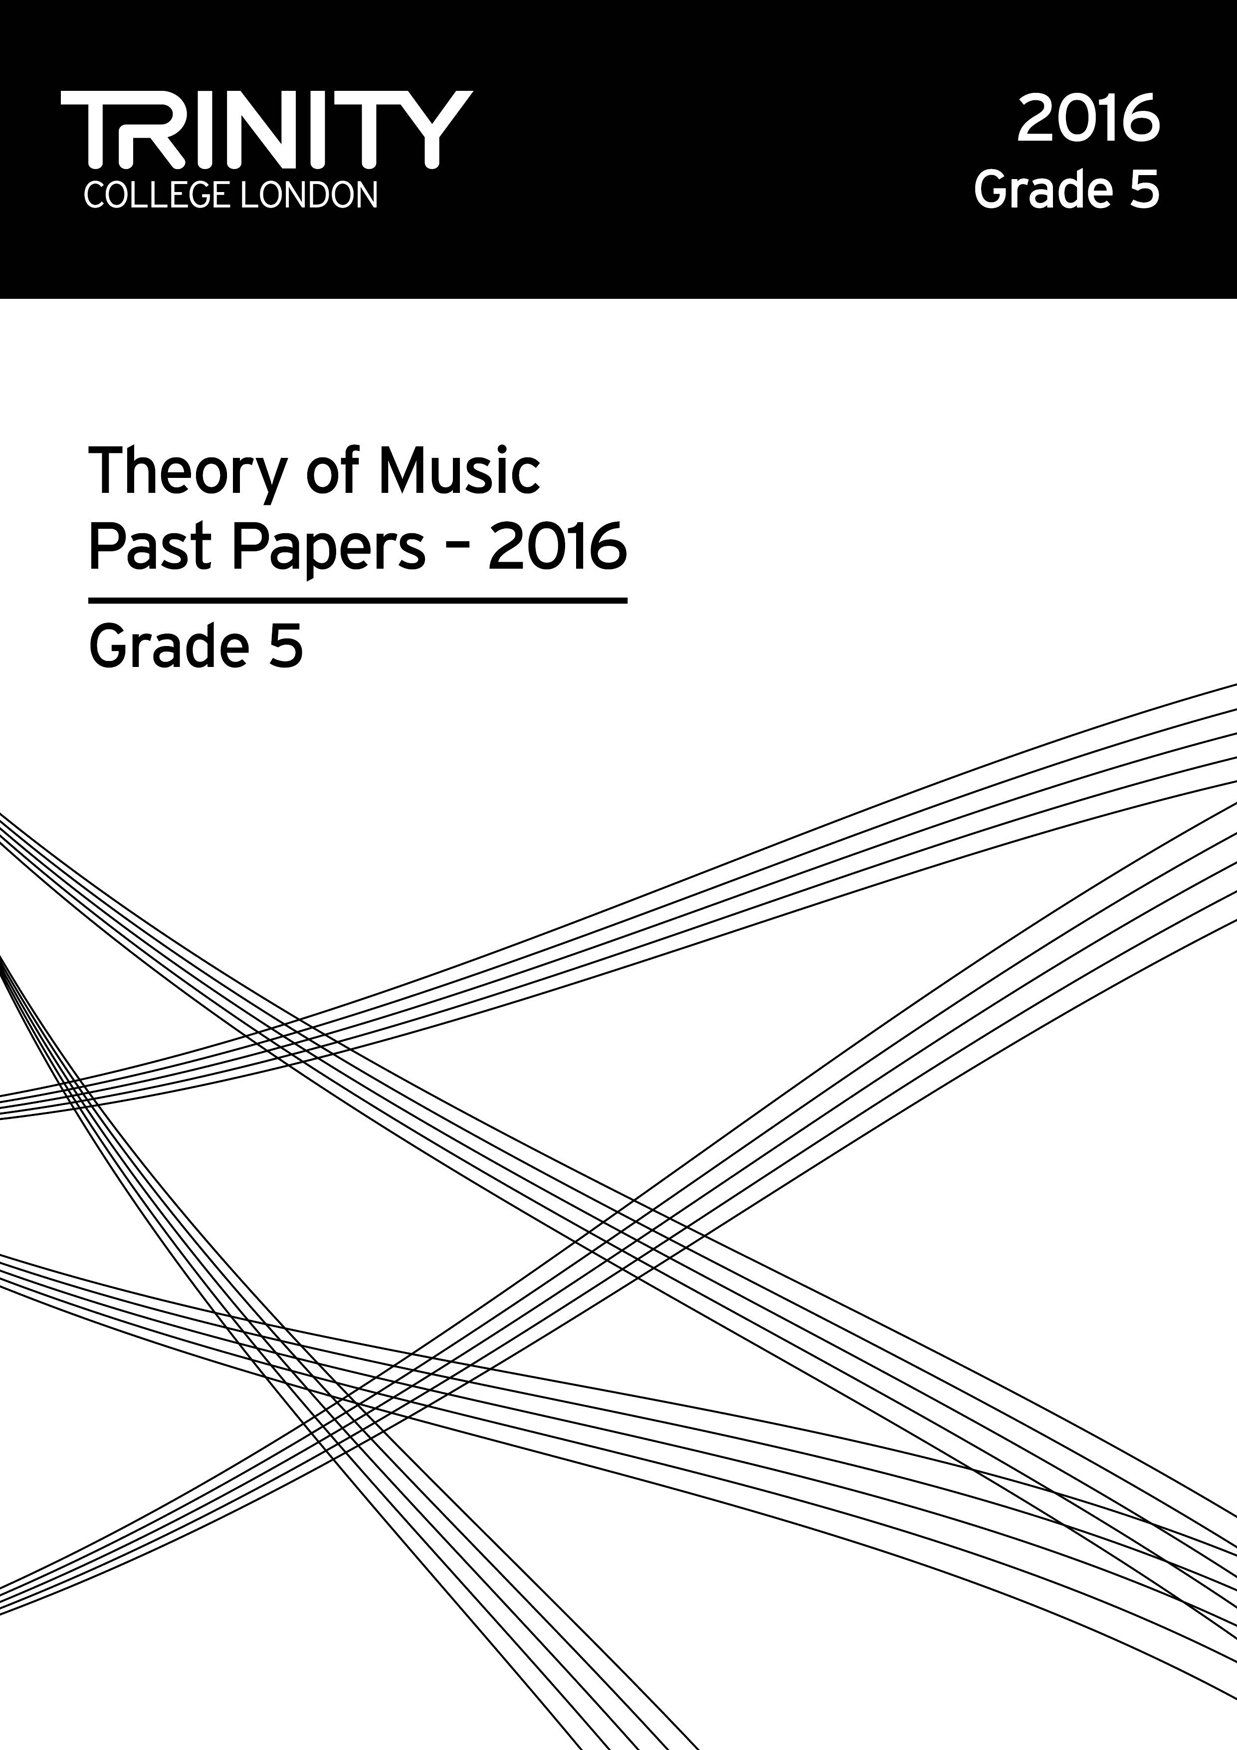 Trinity College London Theory of Music Past Paper 2016 - Grade 5 [Trinity Theory Past Papers]